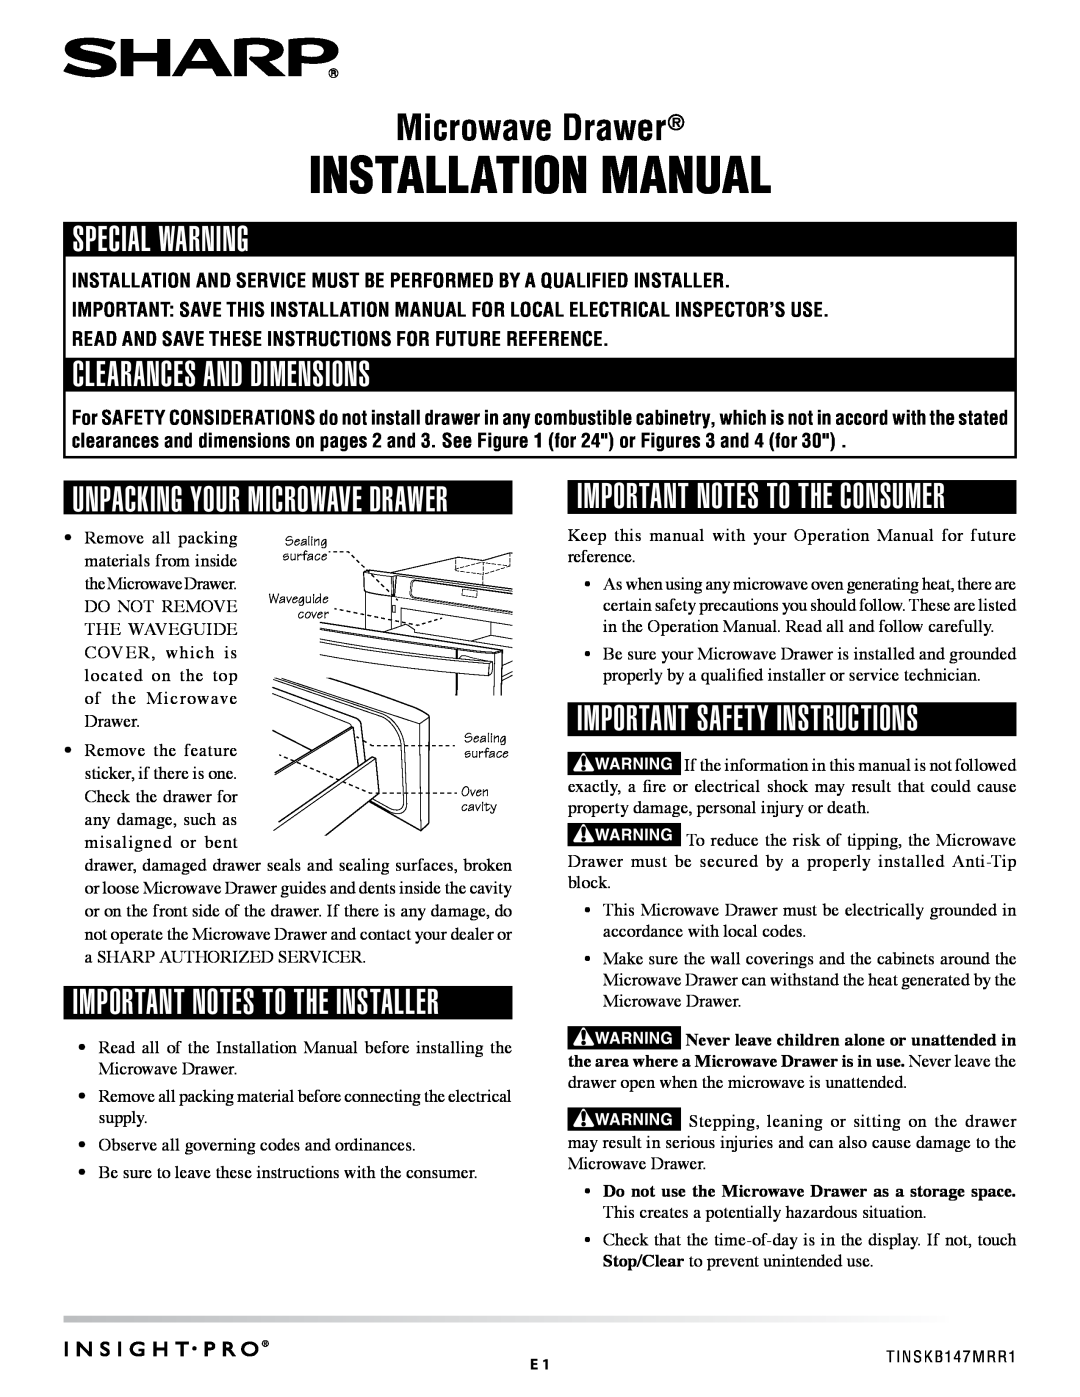 Sharp TINSKB147MRR1 installation manual Special Warning, Clearances and Dimensions, Important Safety Instructions 